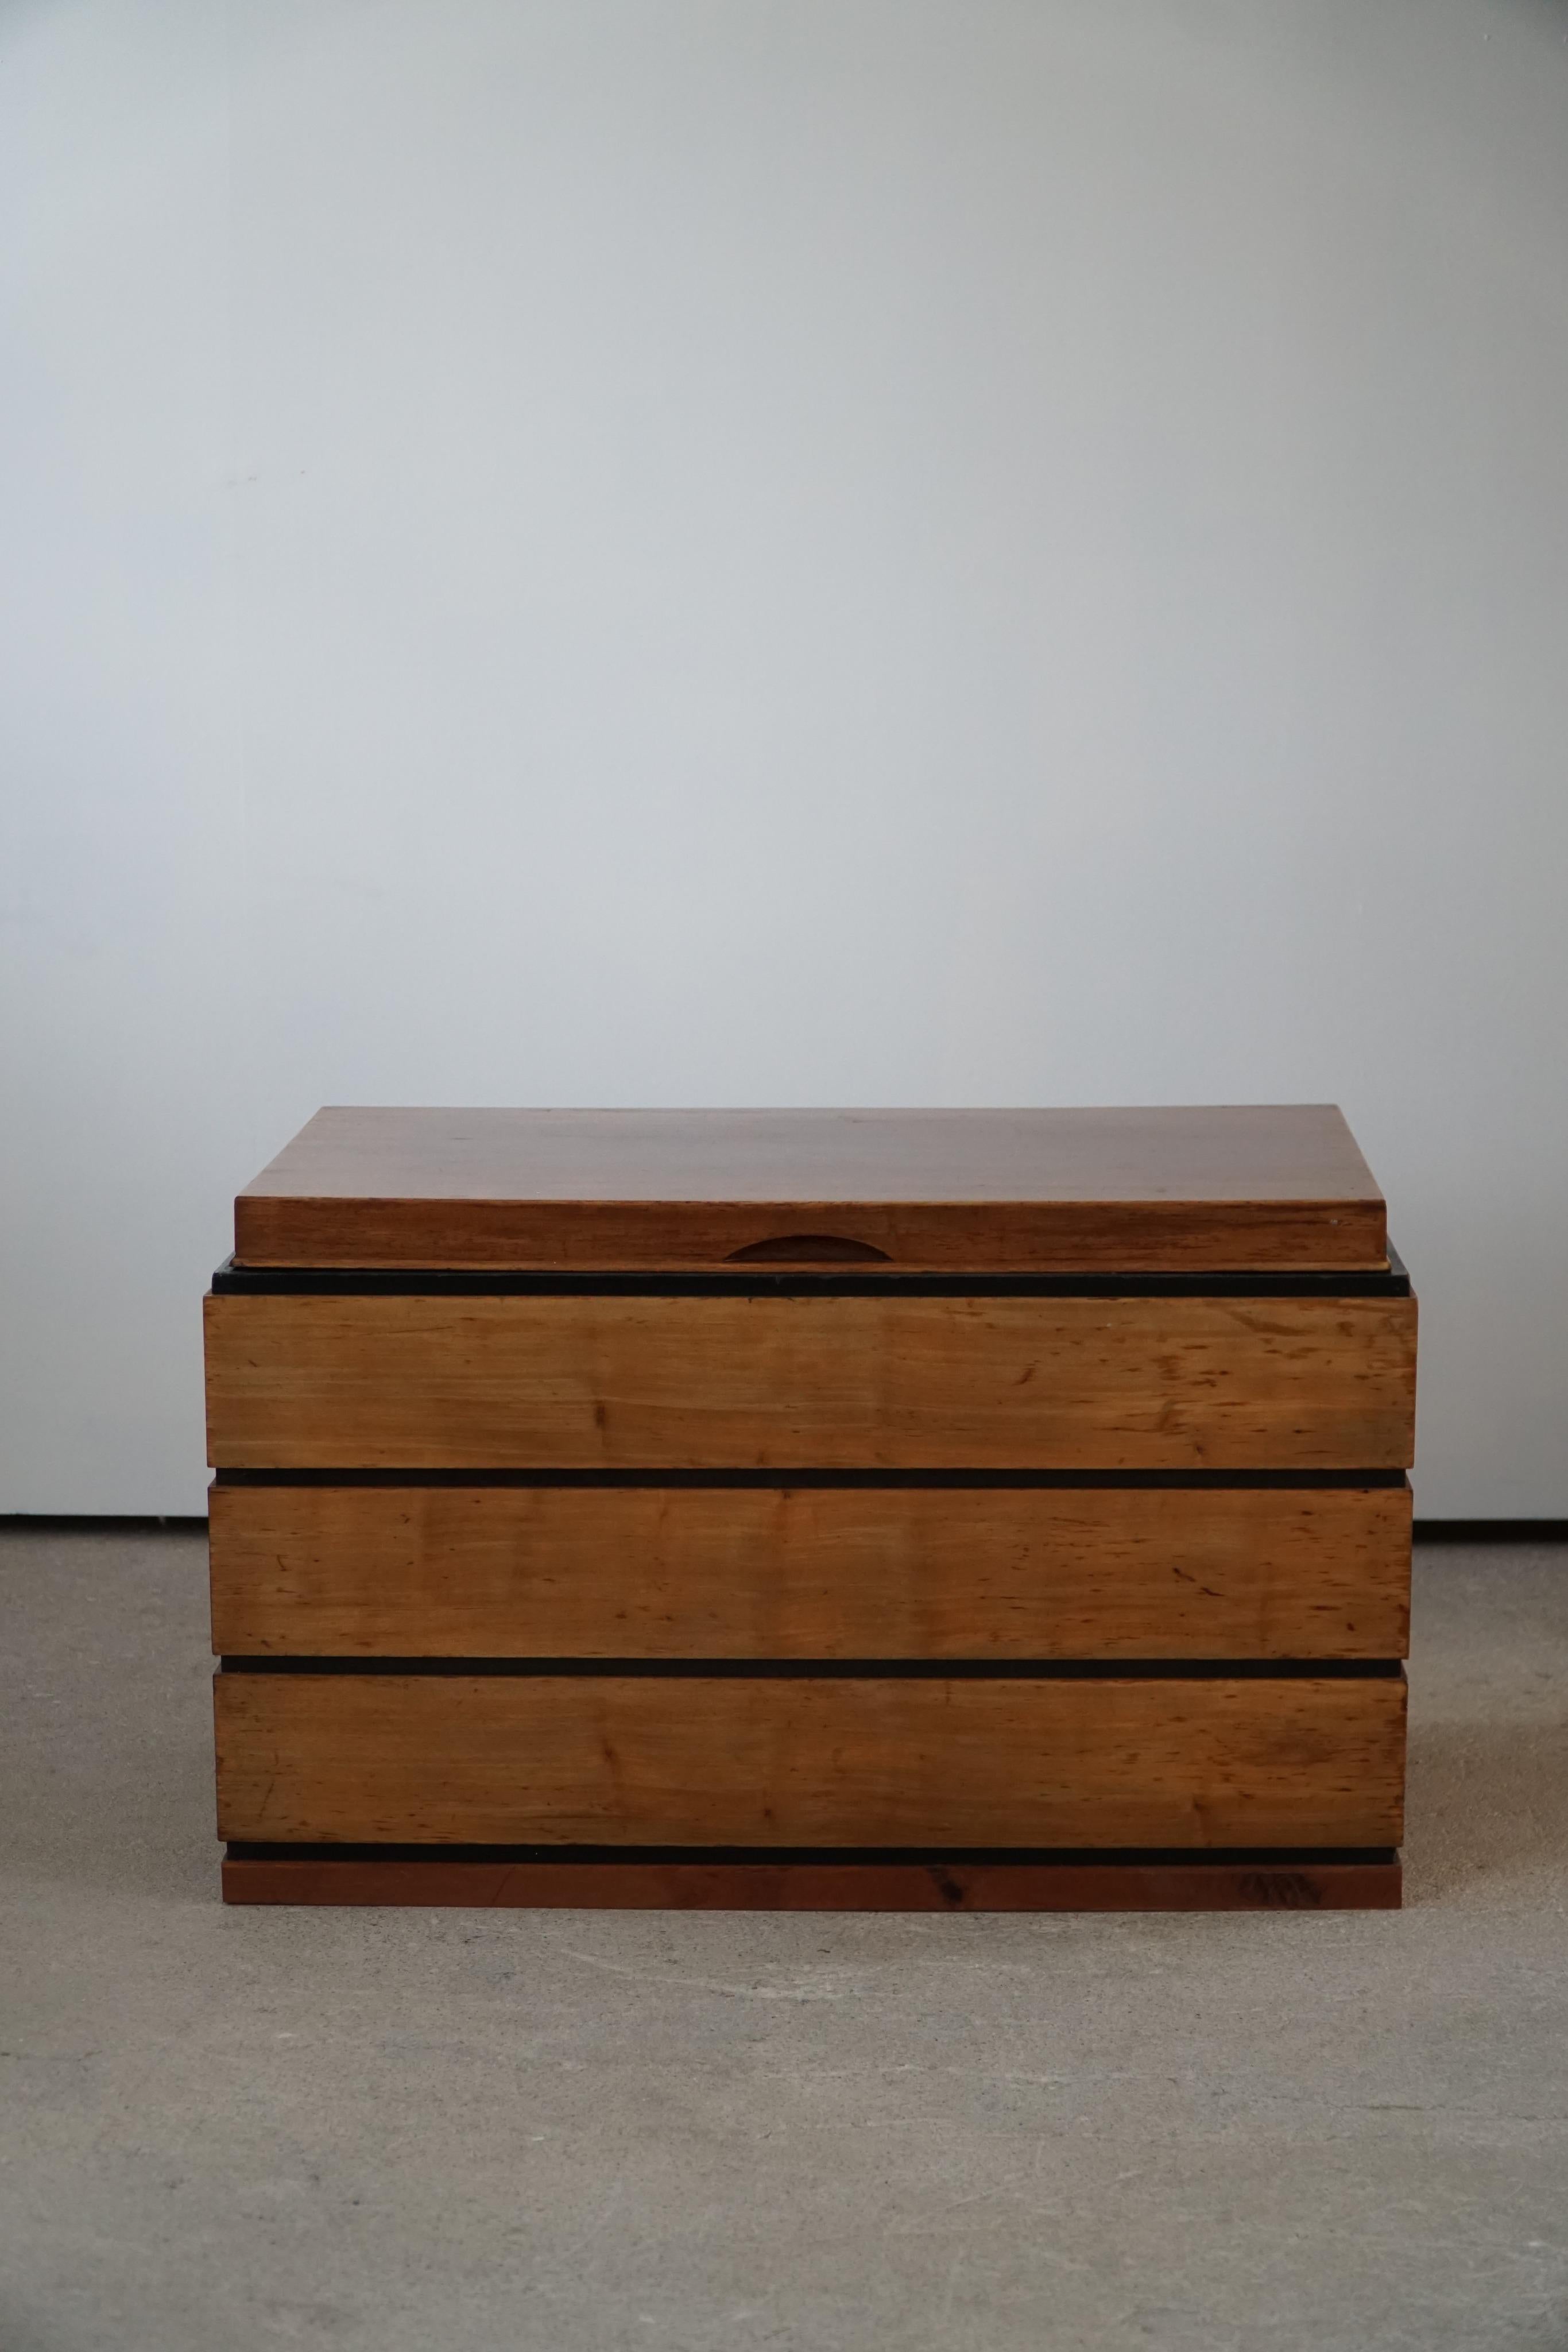 Birch Art Deco Side Table / Chest, Danish Cabinetmaker, Made in the 1940s